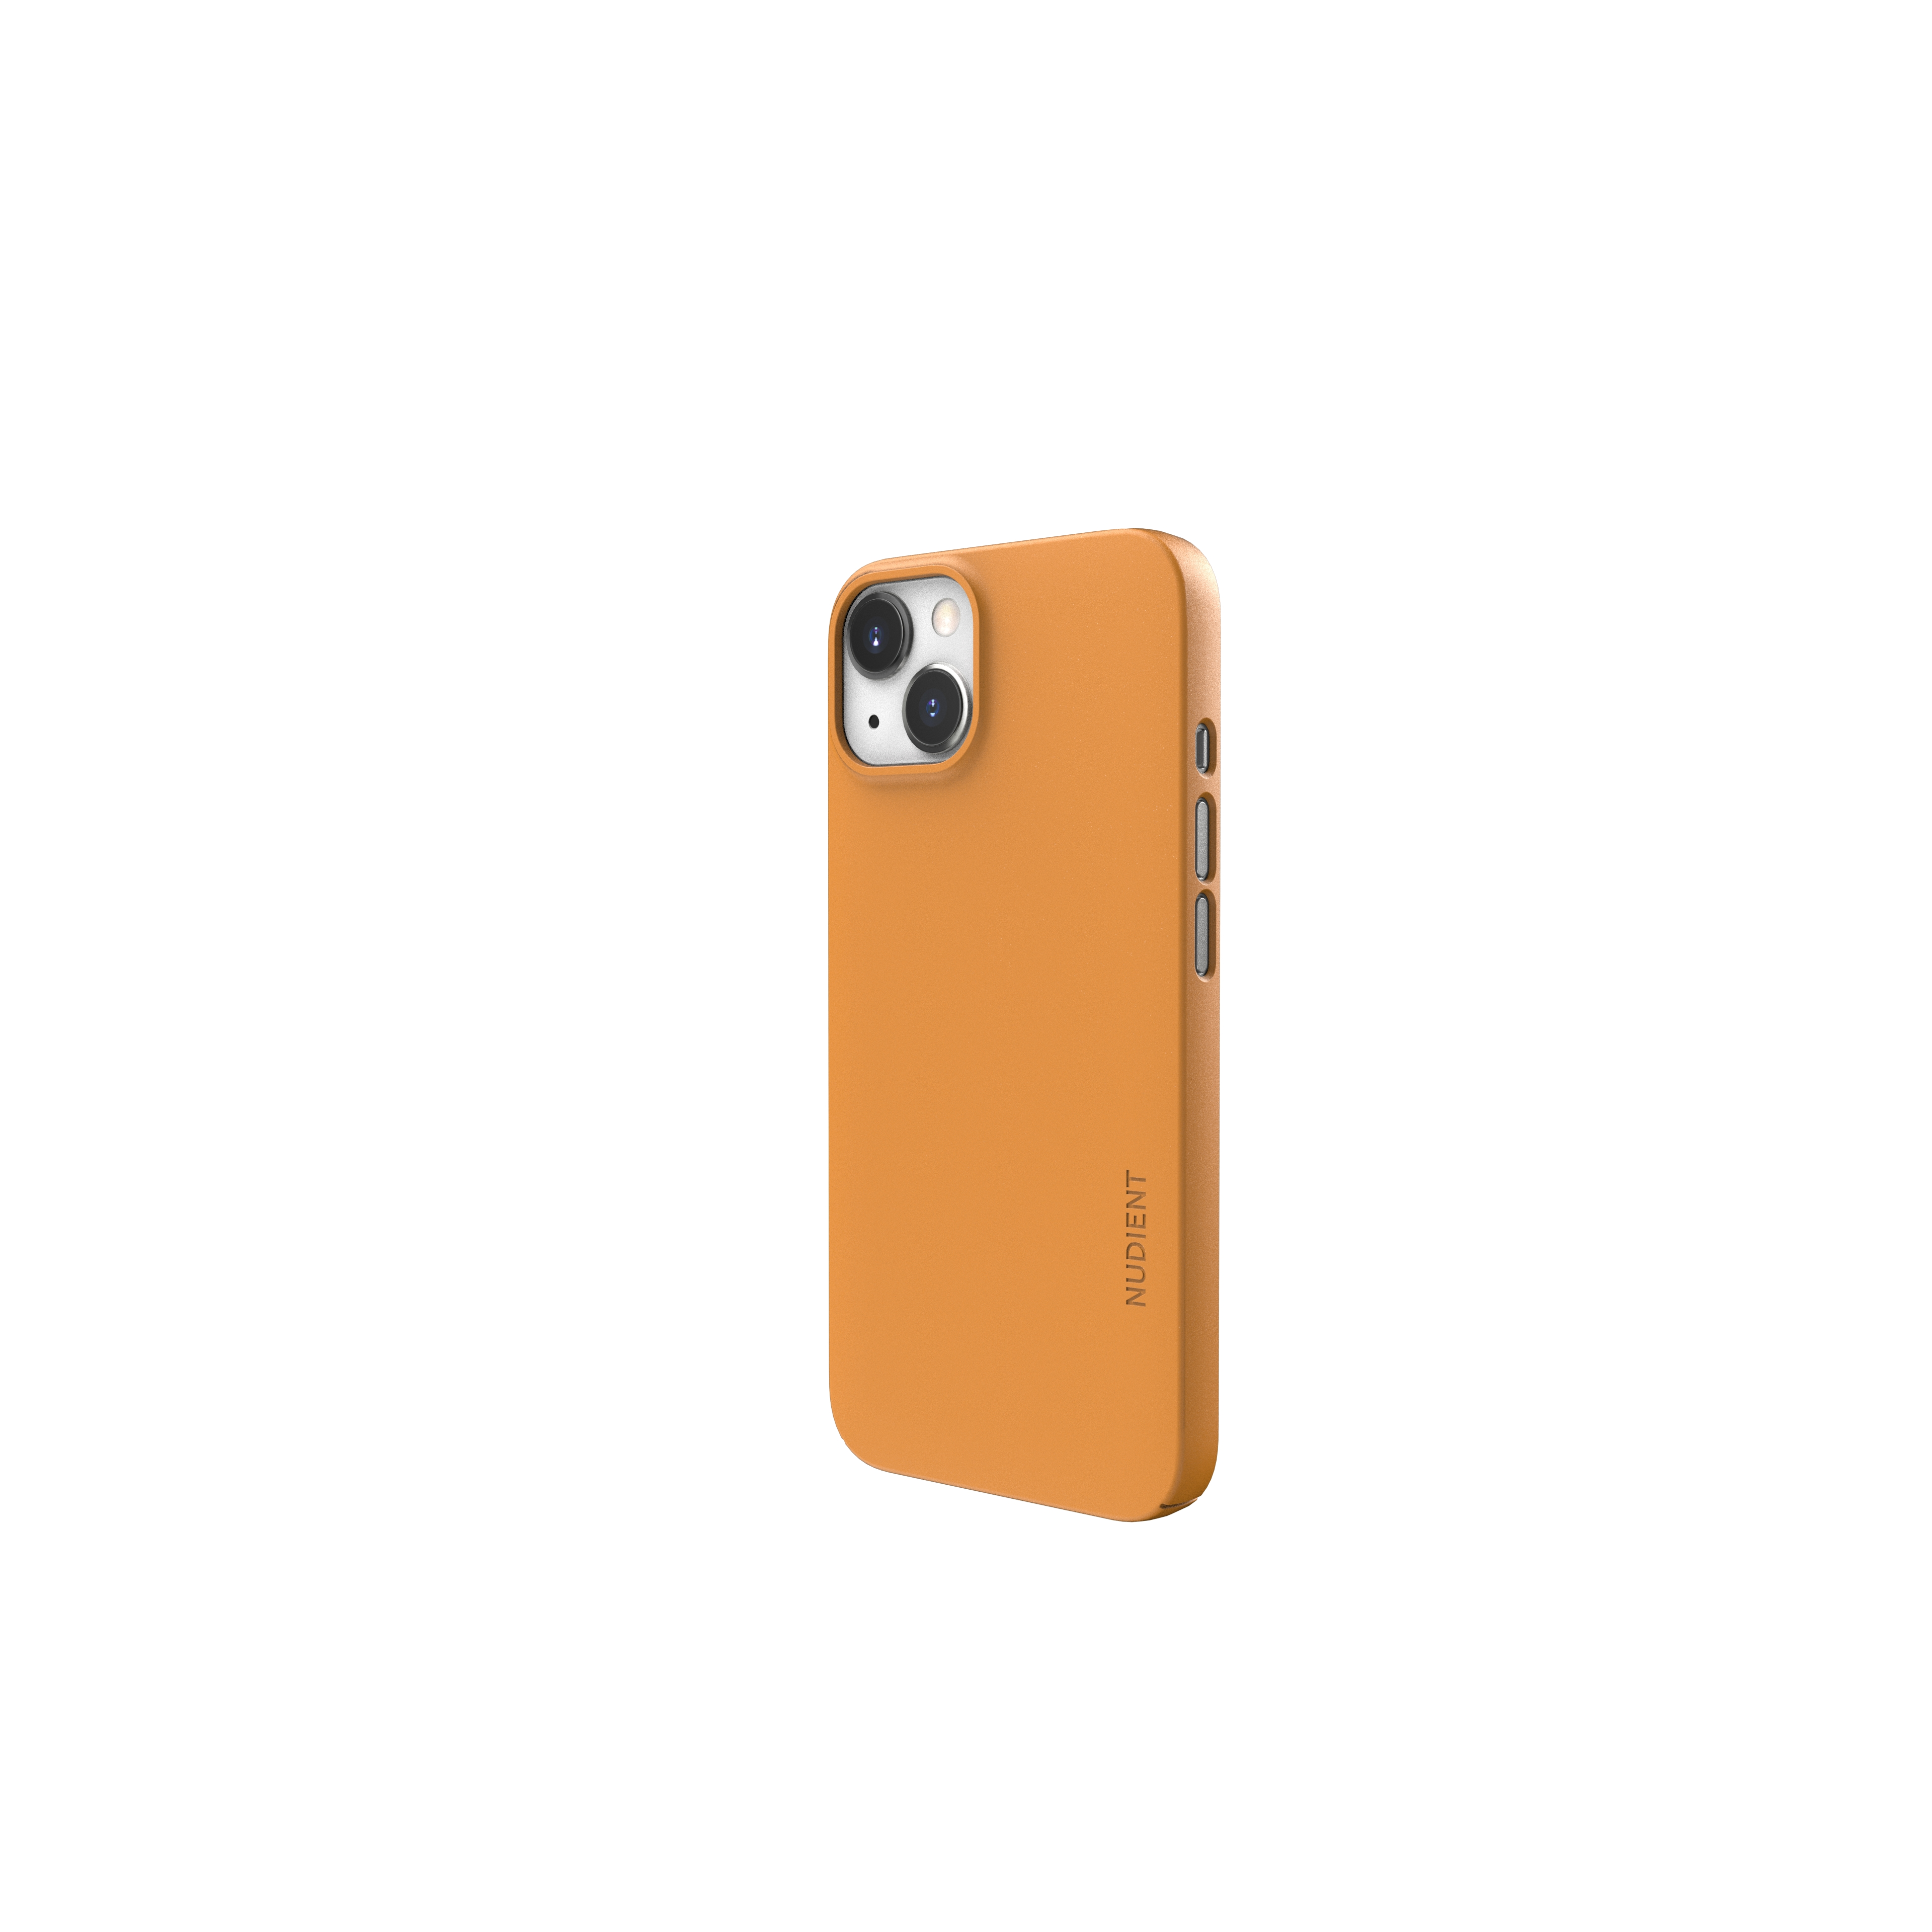 V3, NUDIENT Case Backcover, YELLOW APPLE, IPHONE 13, Thin